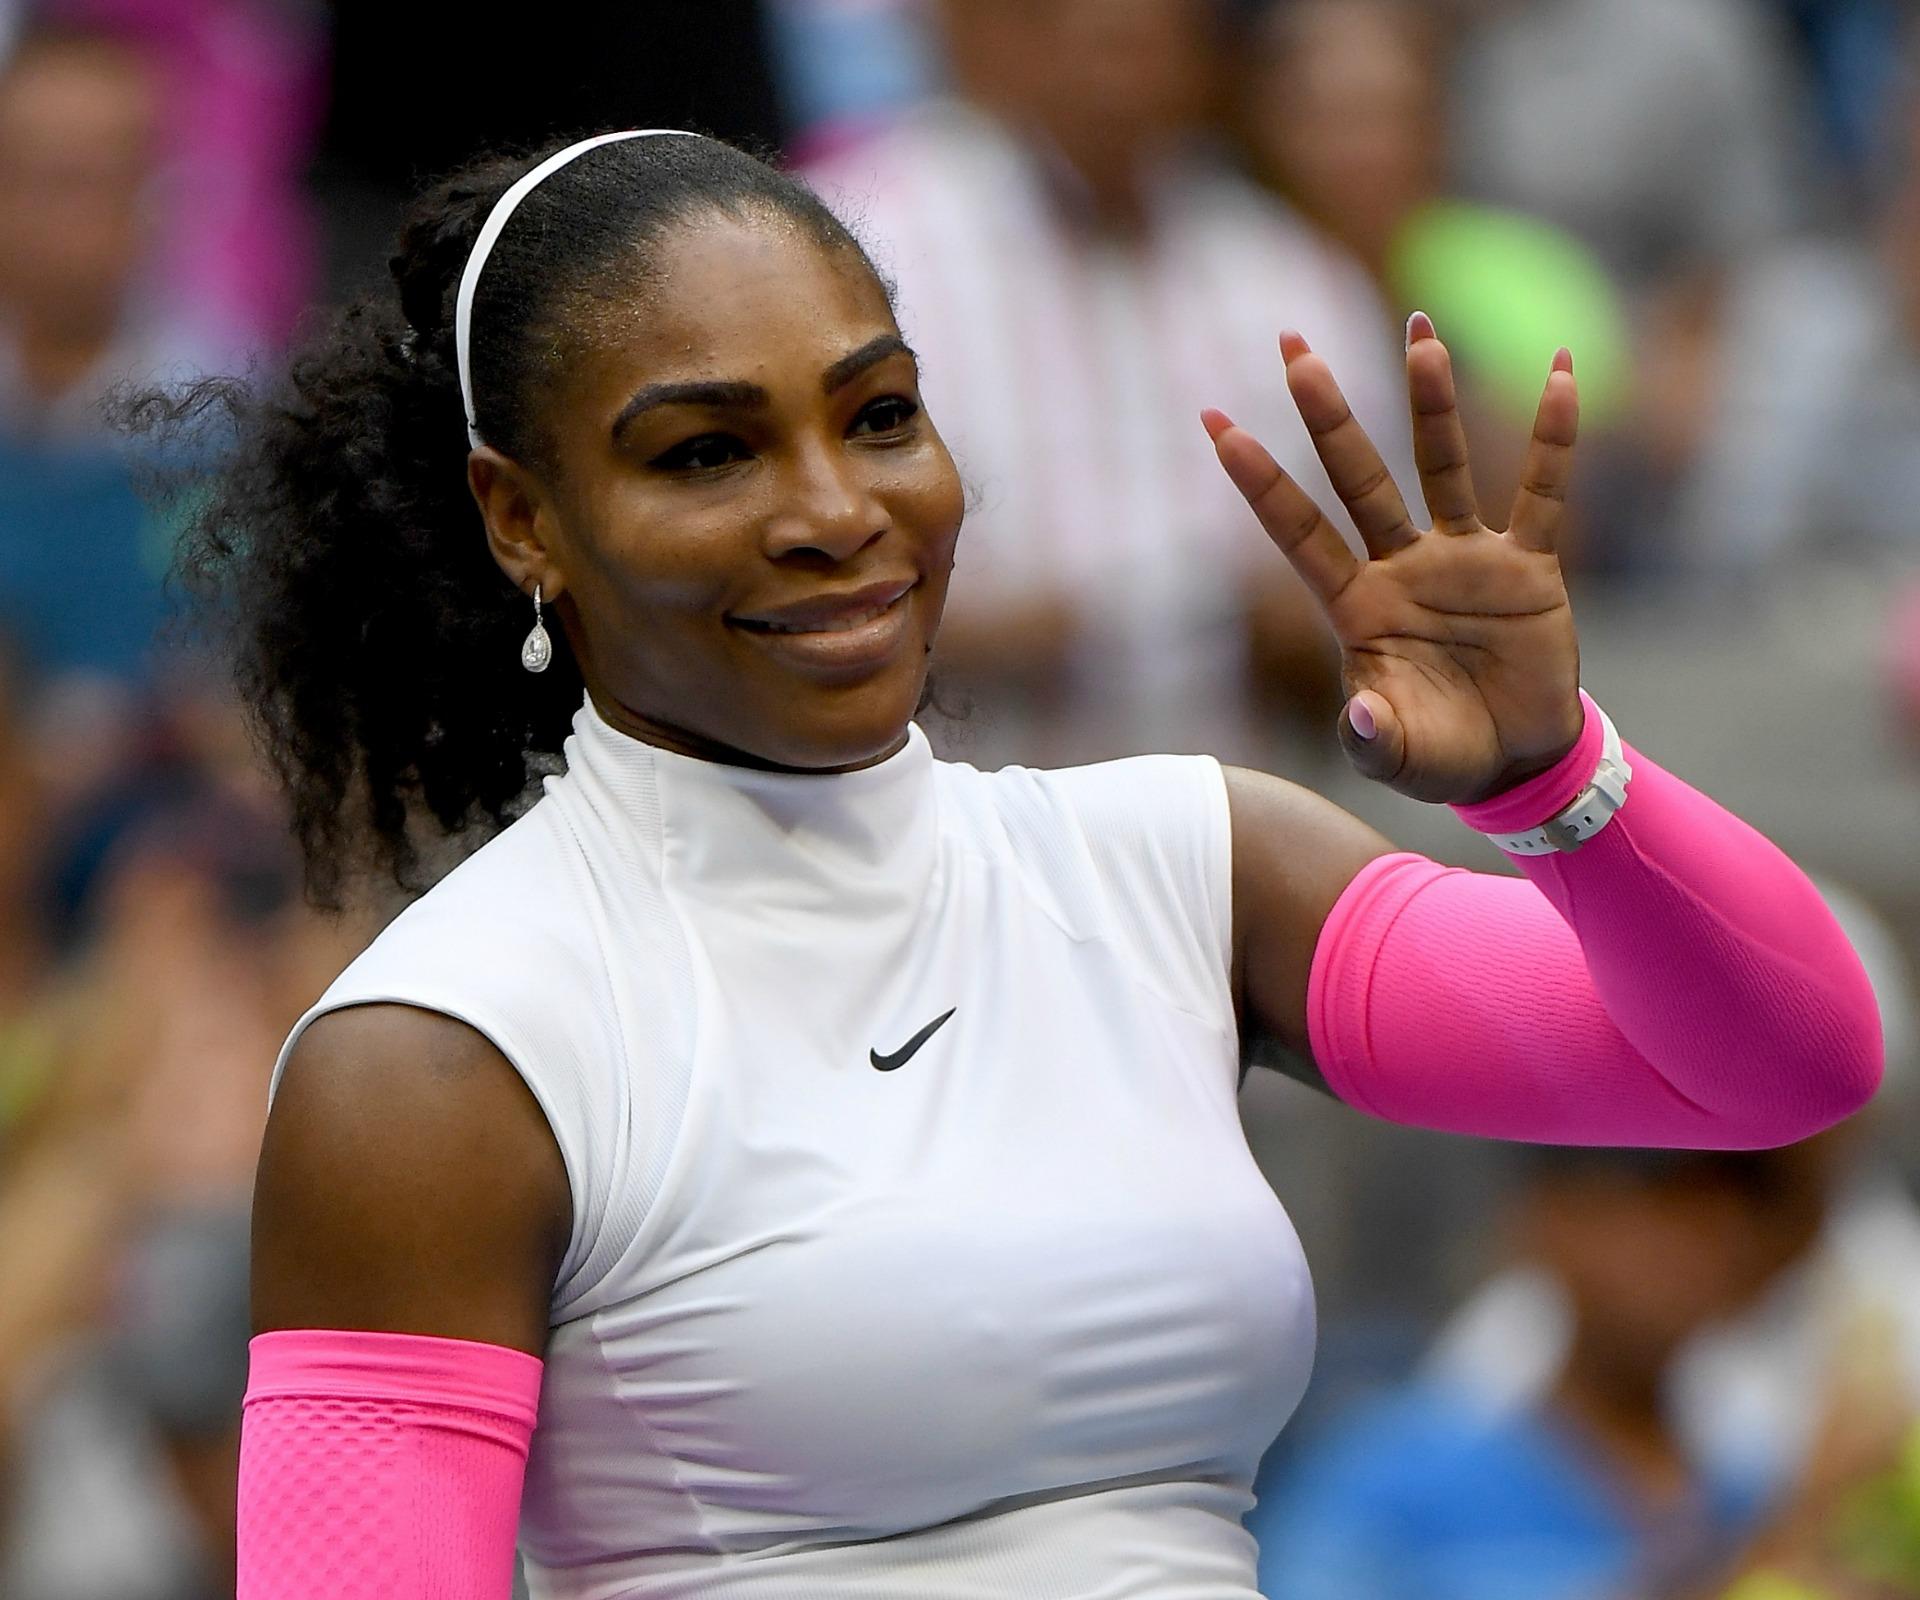 Serena Williams shares heartfelt letter to her unborn baby: “I can’t wait to meet you”